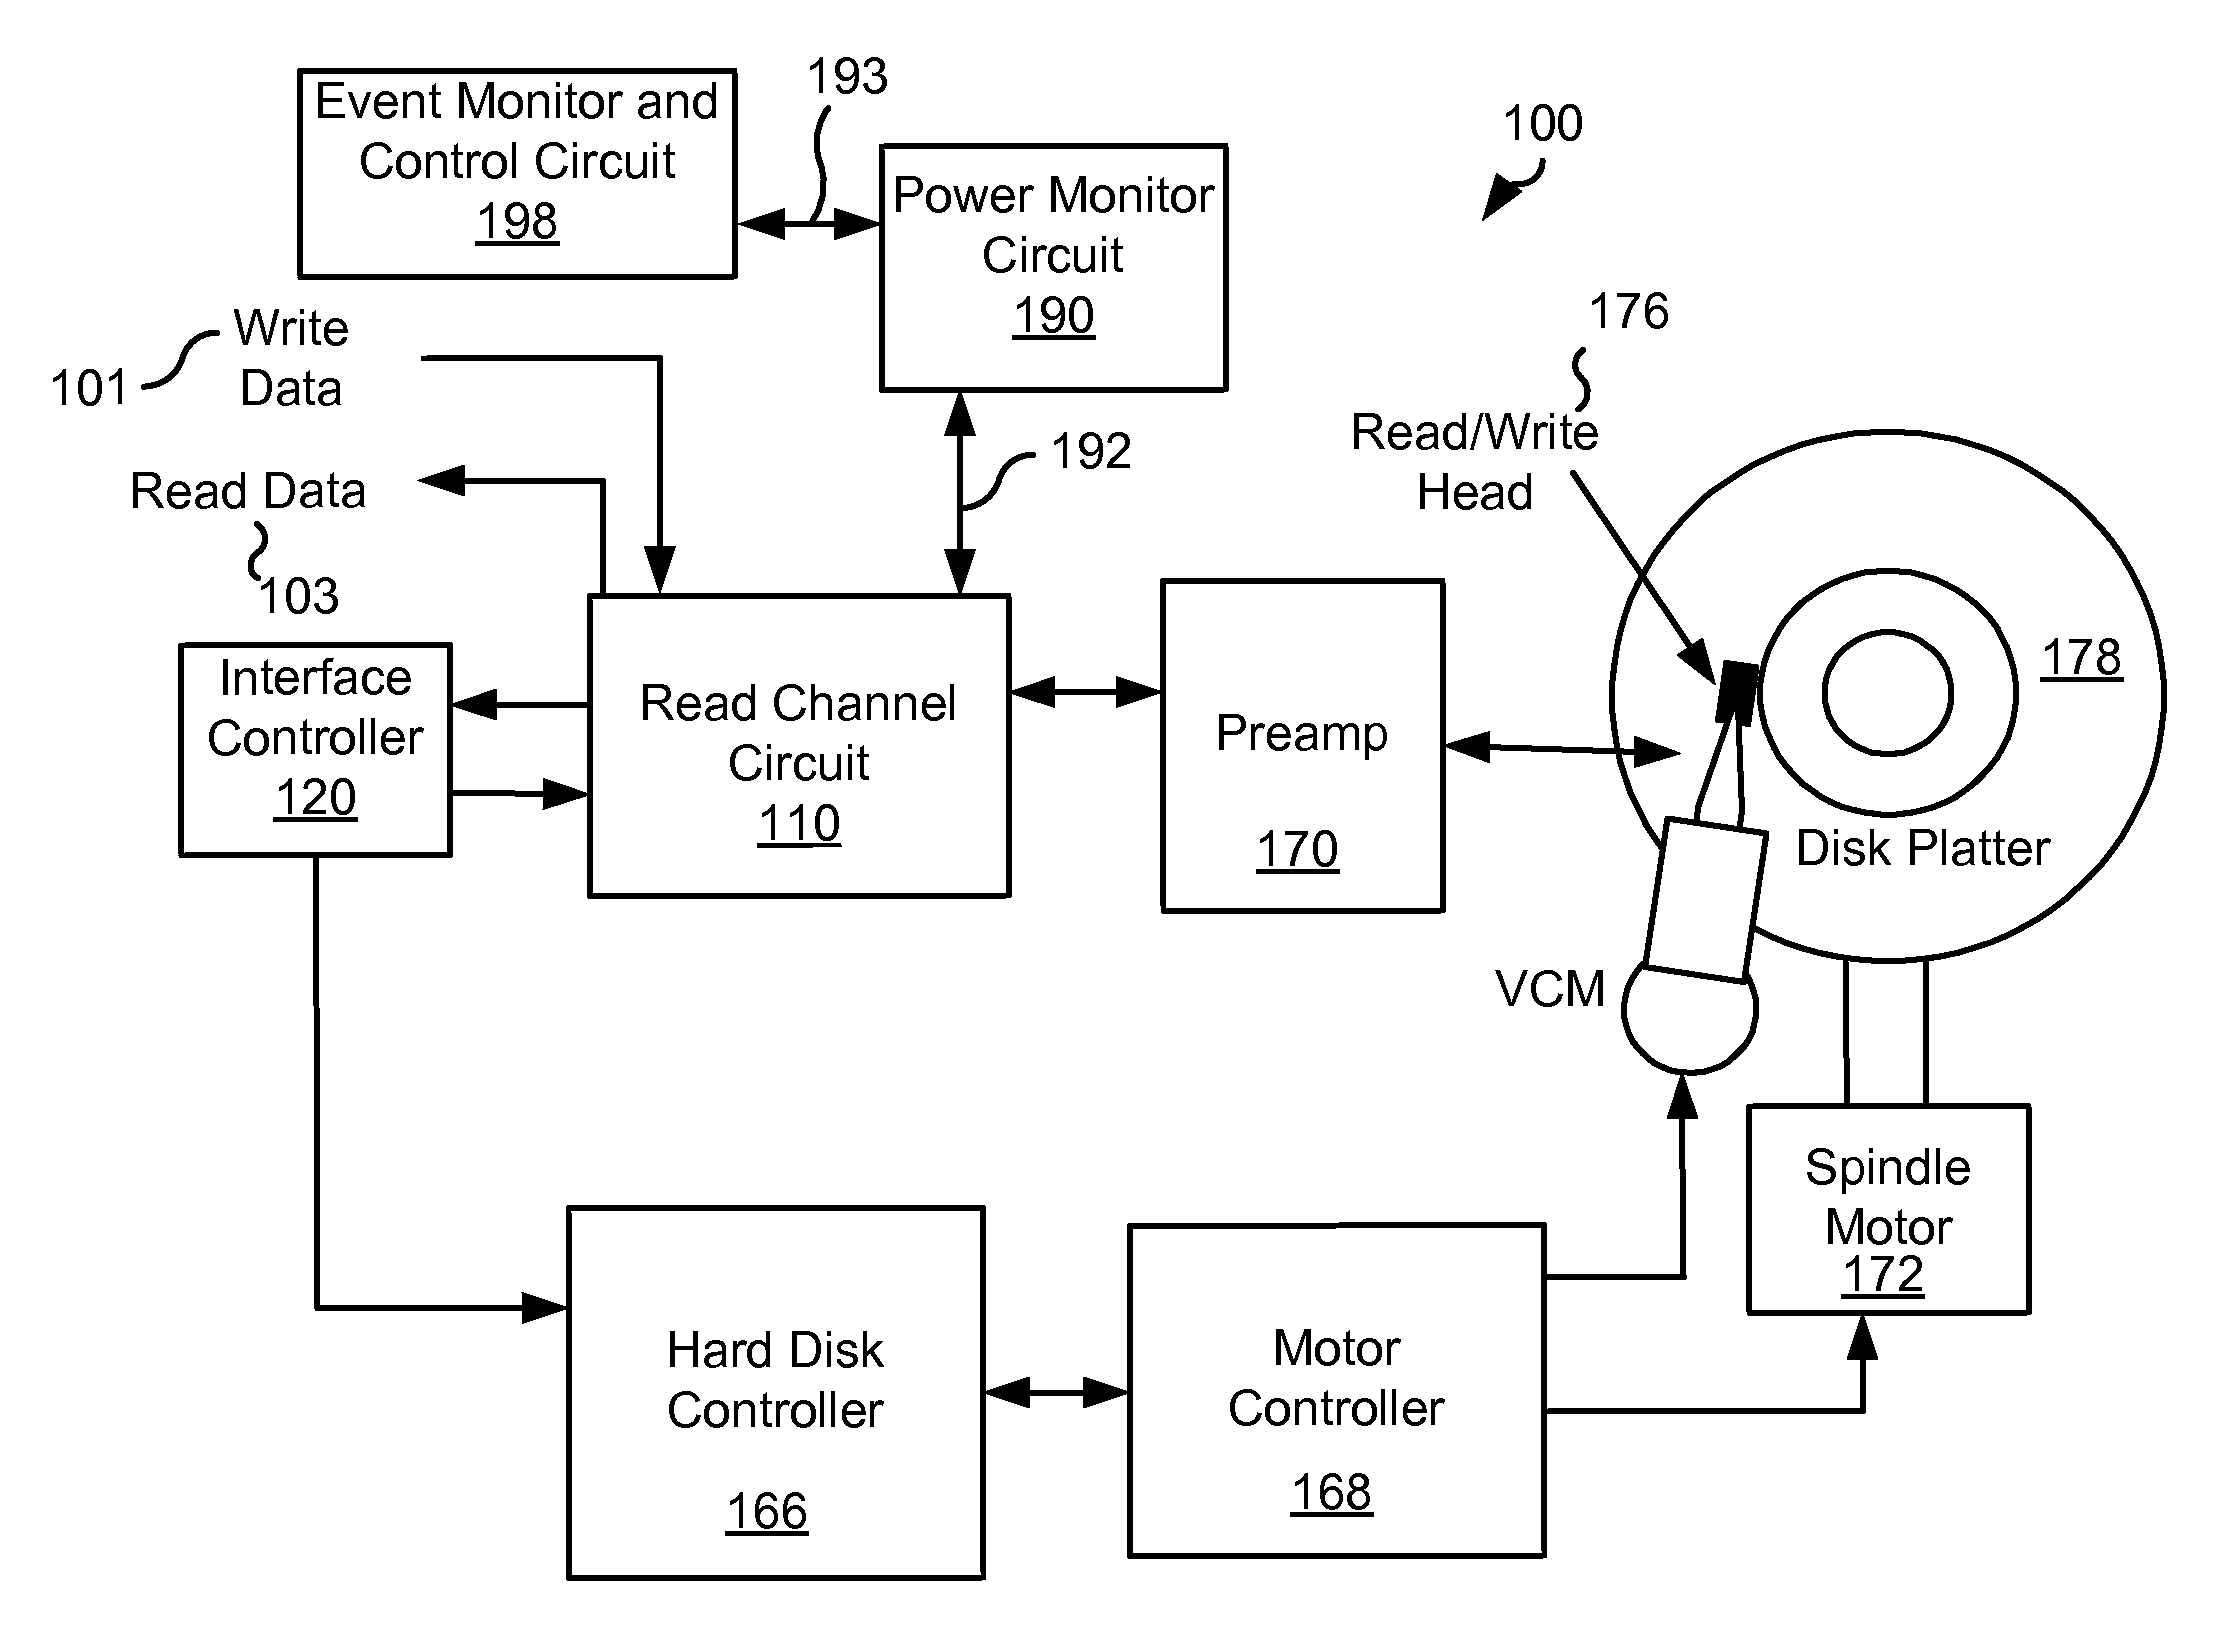 Systems and Methods for Power Monitoring in a Variable Data Processing System